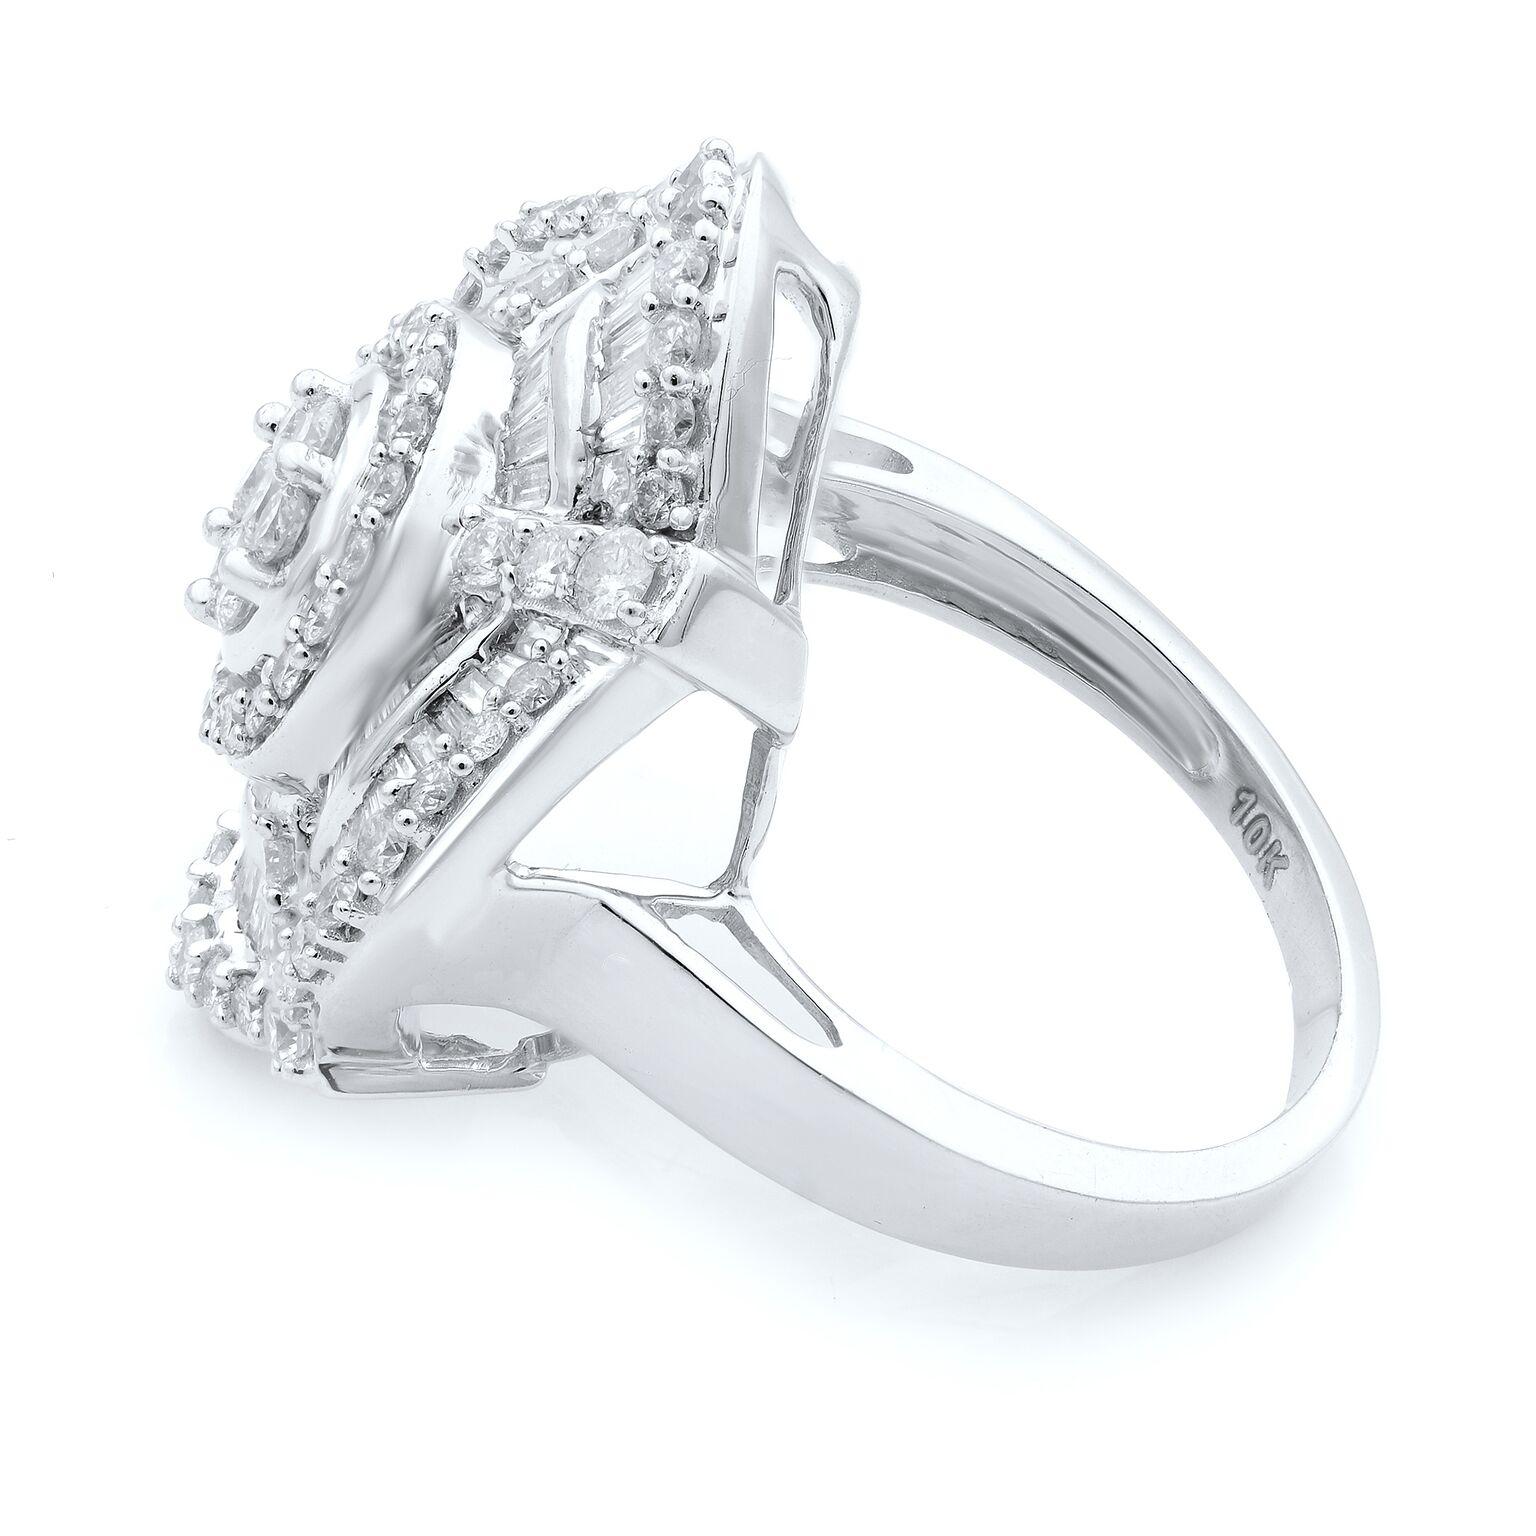 This special diamond cocktail ring which embed pure beauty of unique combination of approximately 1.85 carat of round cut and baguette cut diamonds in G color and SI clarity set in prong setting 10K white gold. Ring measurements: 25x23mm. Ring size: